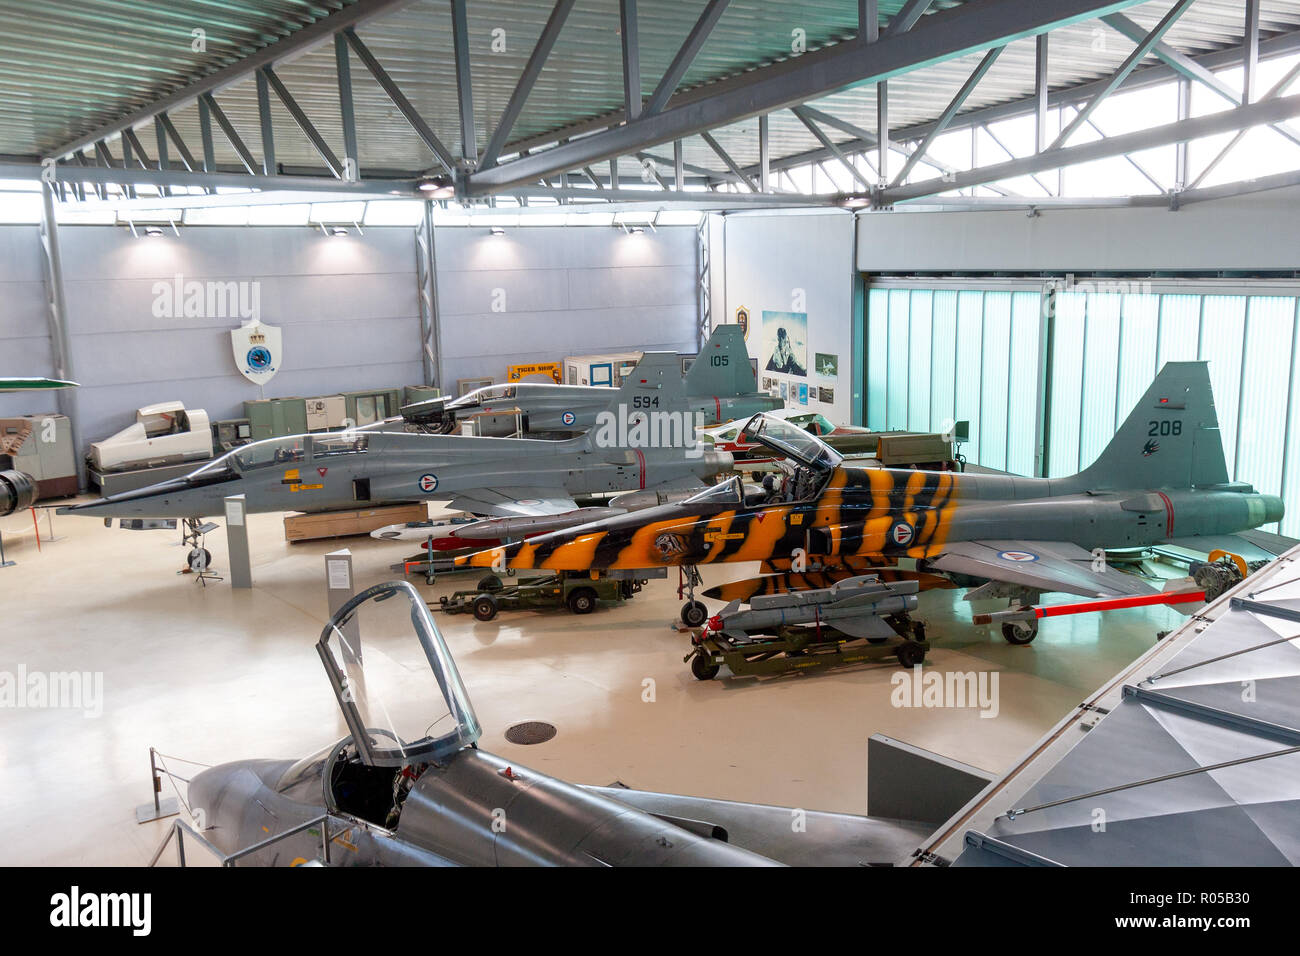 OSLO, NORWAY - JUL 16, 2011: Royal Norwegian Air Force F-5 Tiger fighter jets on display in the Norwegian Armed Forces Museum at Oslo-Gardermoen airpo Stock Photo